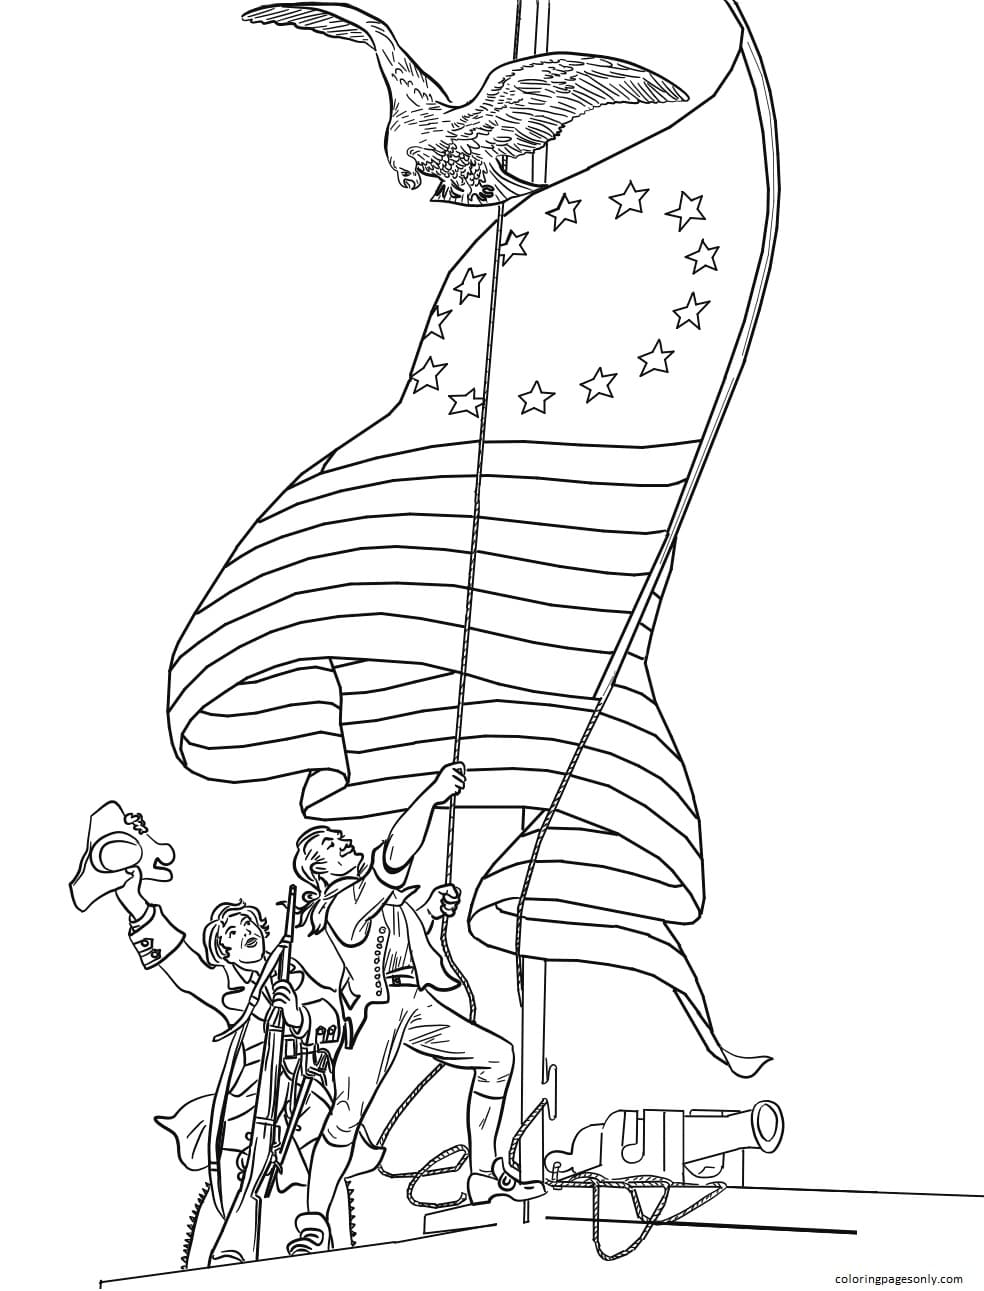 Patriots Raising An American flag Coloring Page